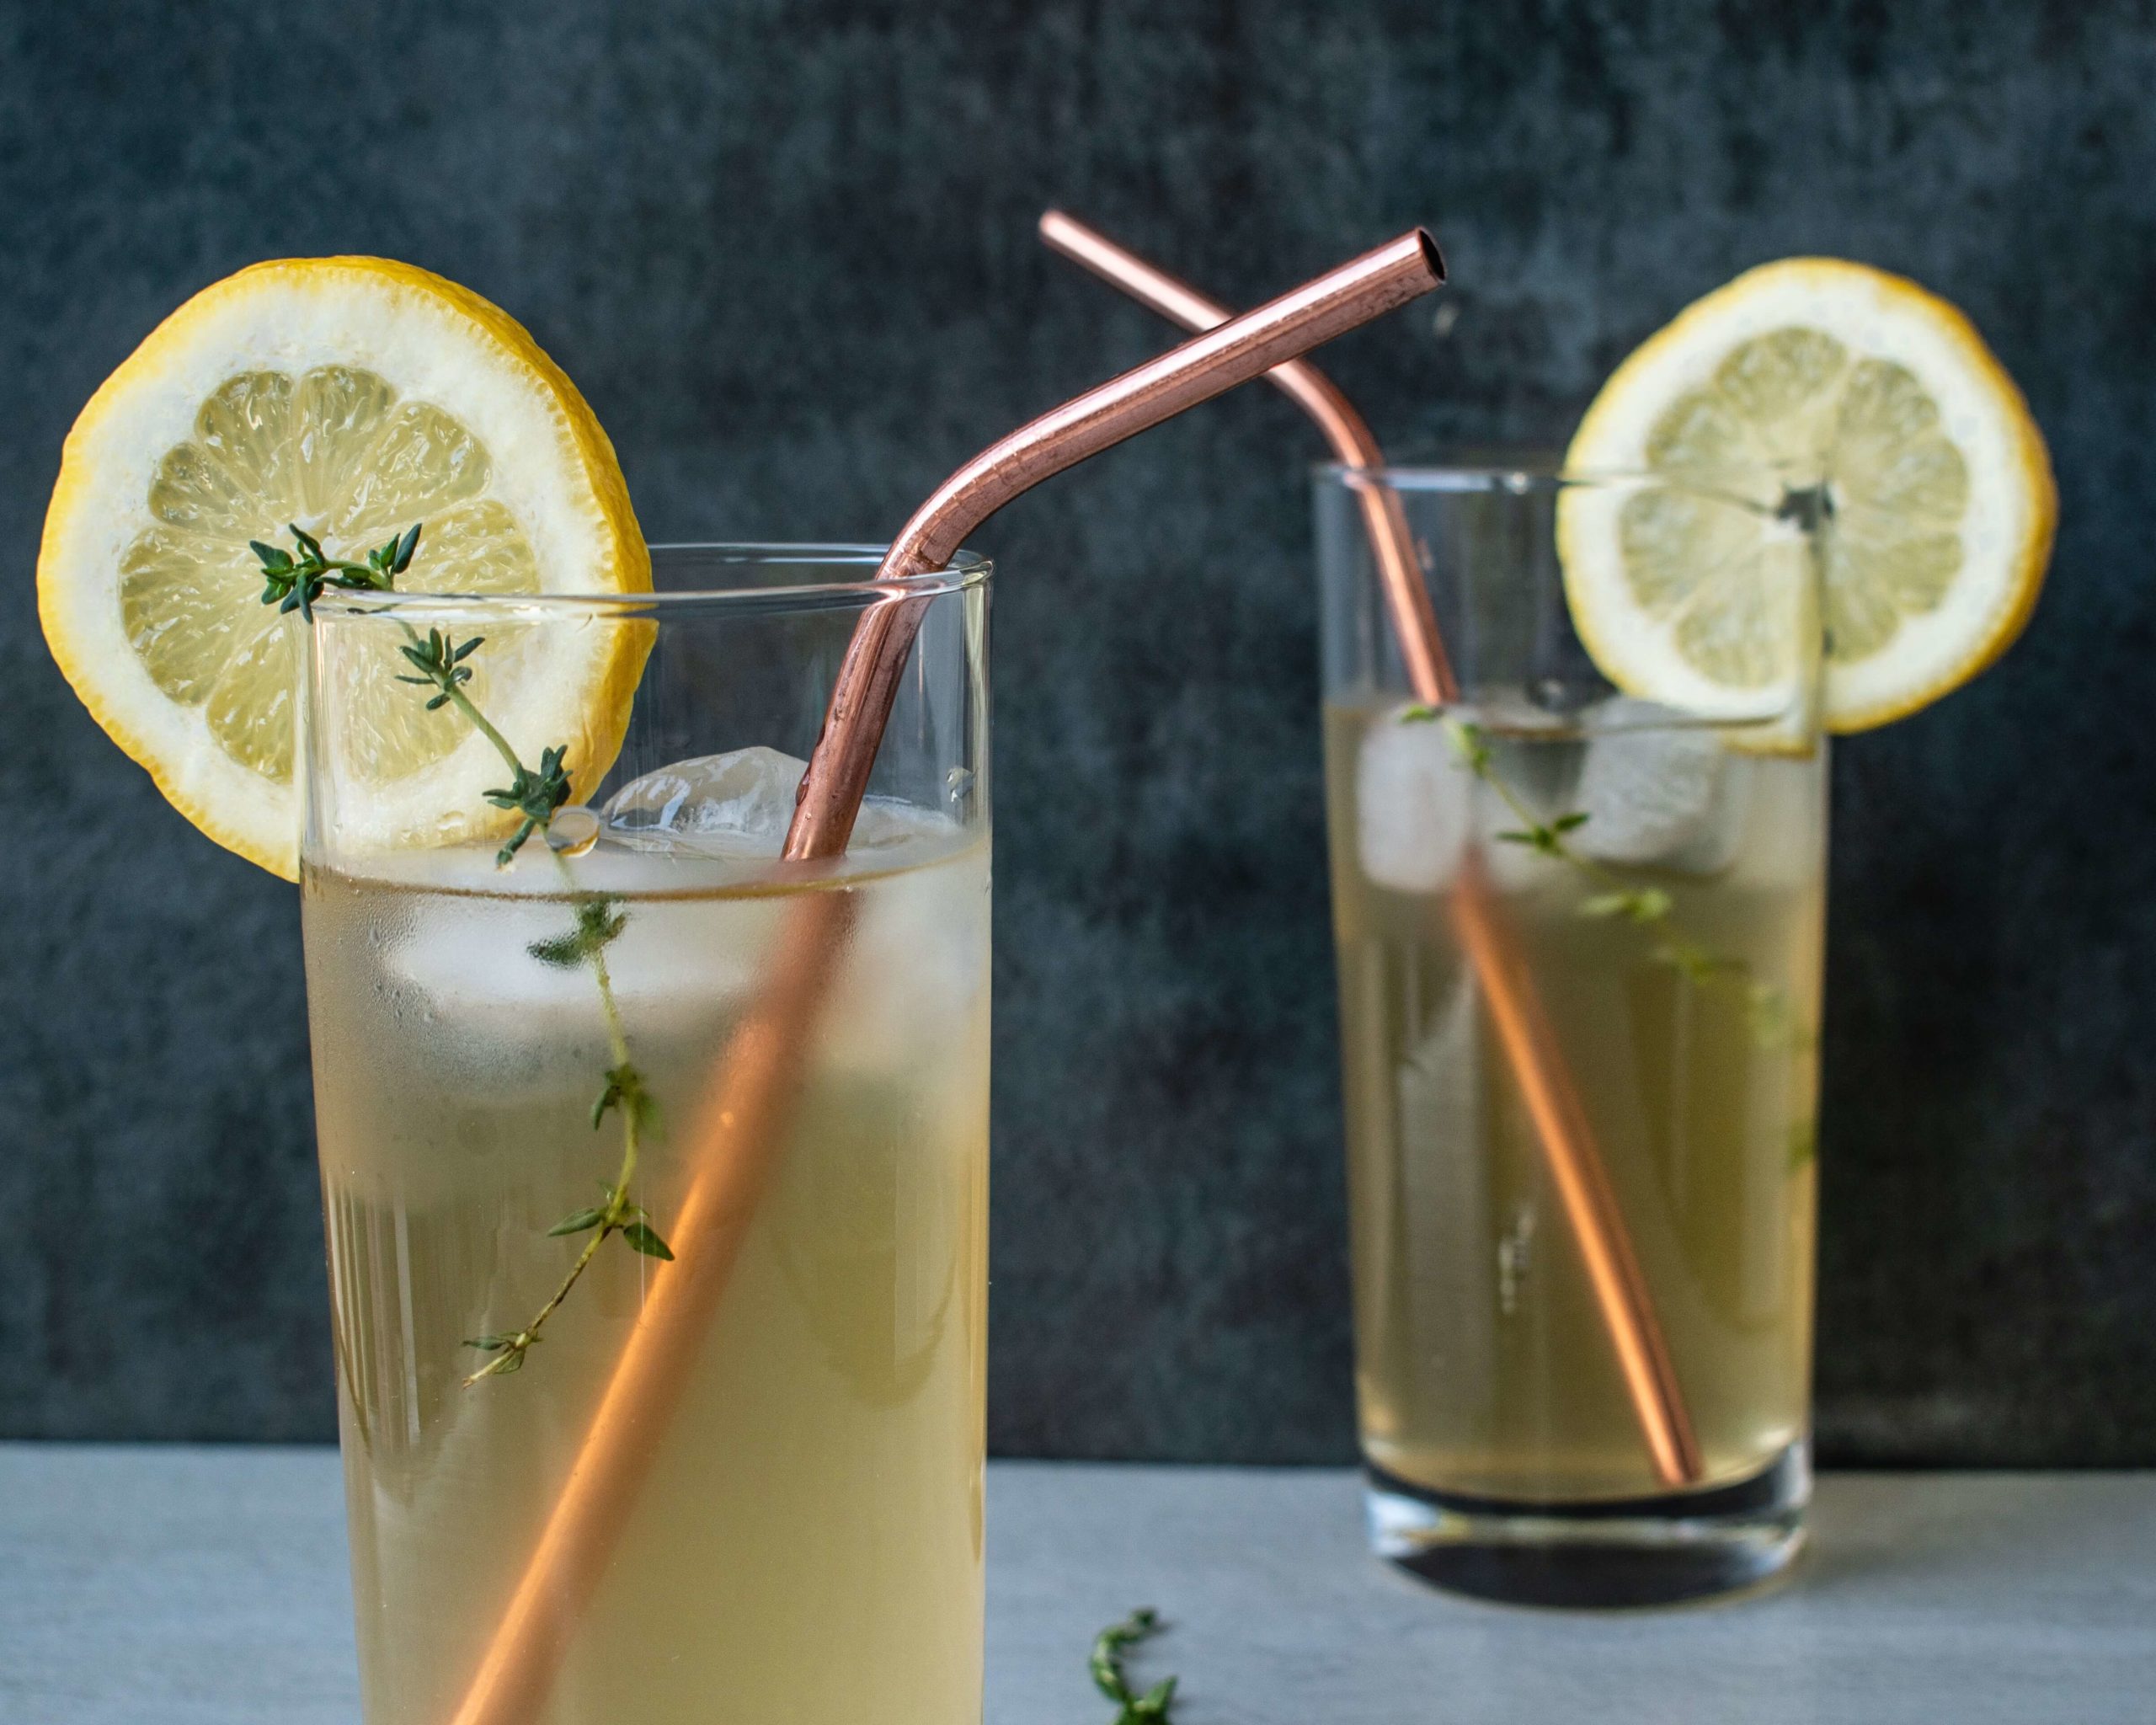 Two glasses of Amish Meadow Tea with cooper straws and lemon slices